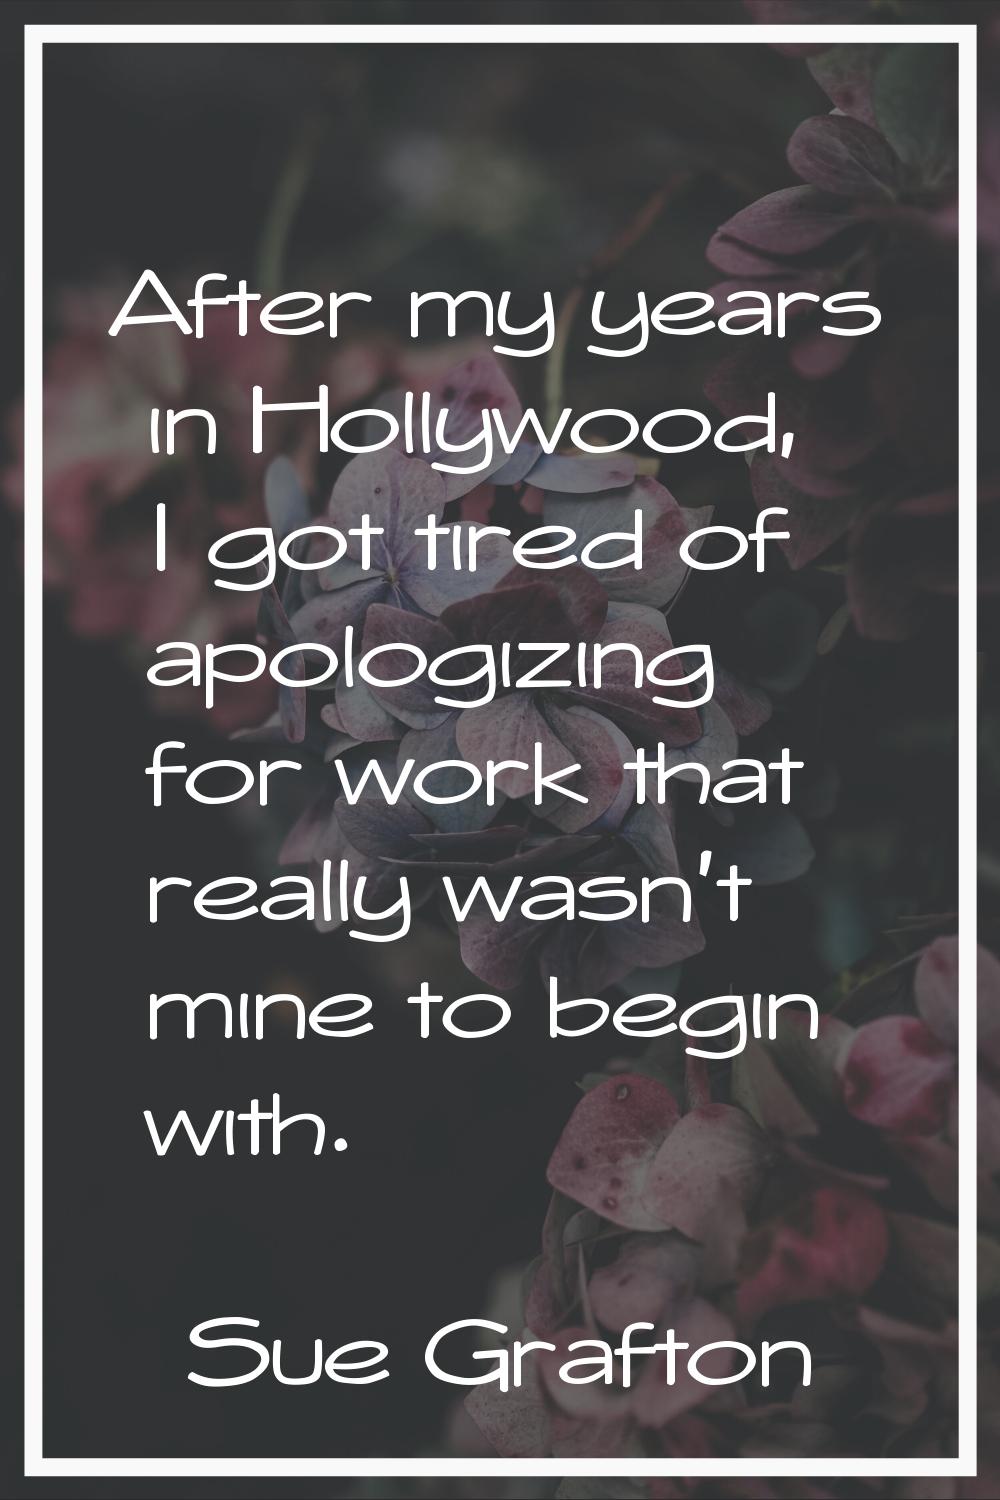 After my years in Hollywood, I got tired of apologizing for work that really wasn't mine to begin w